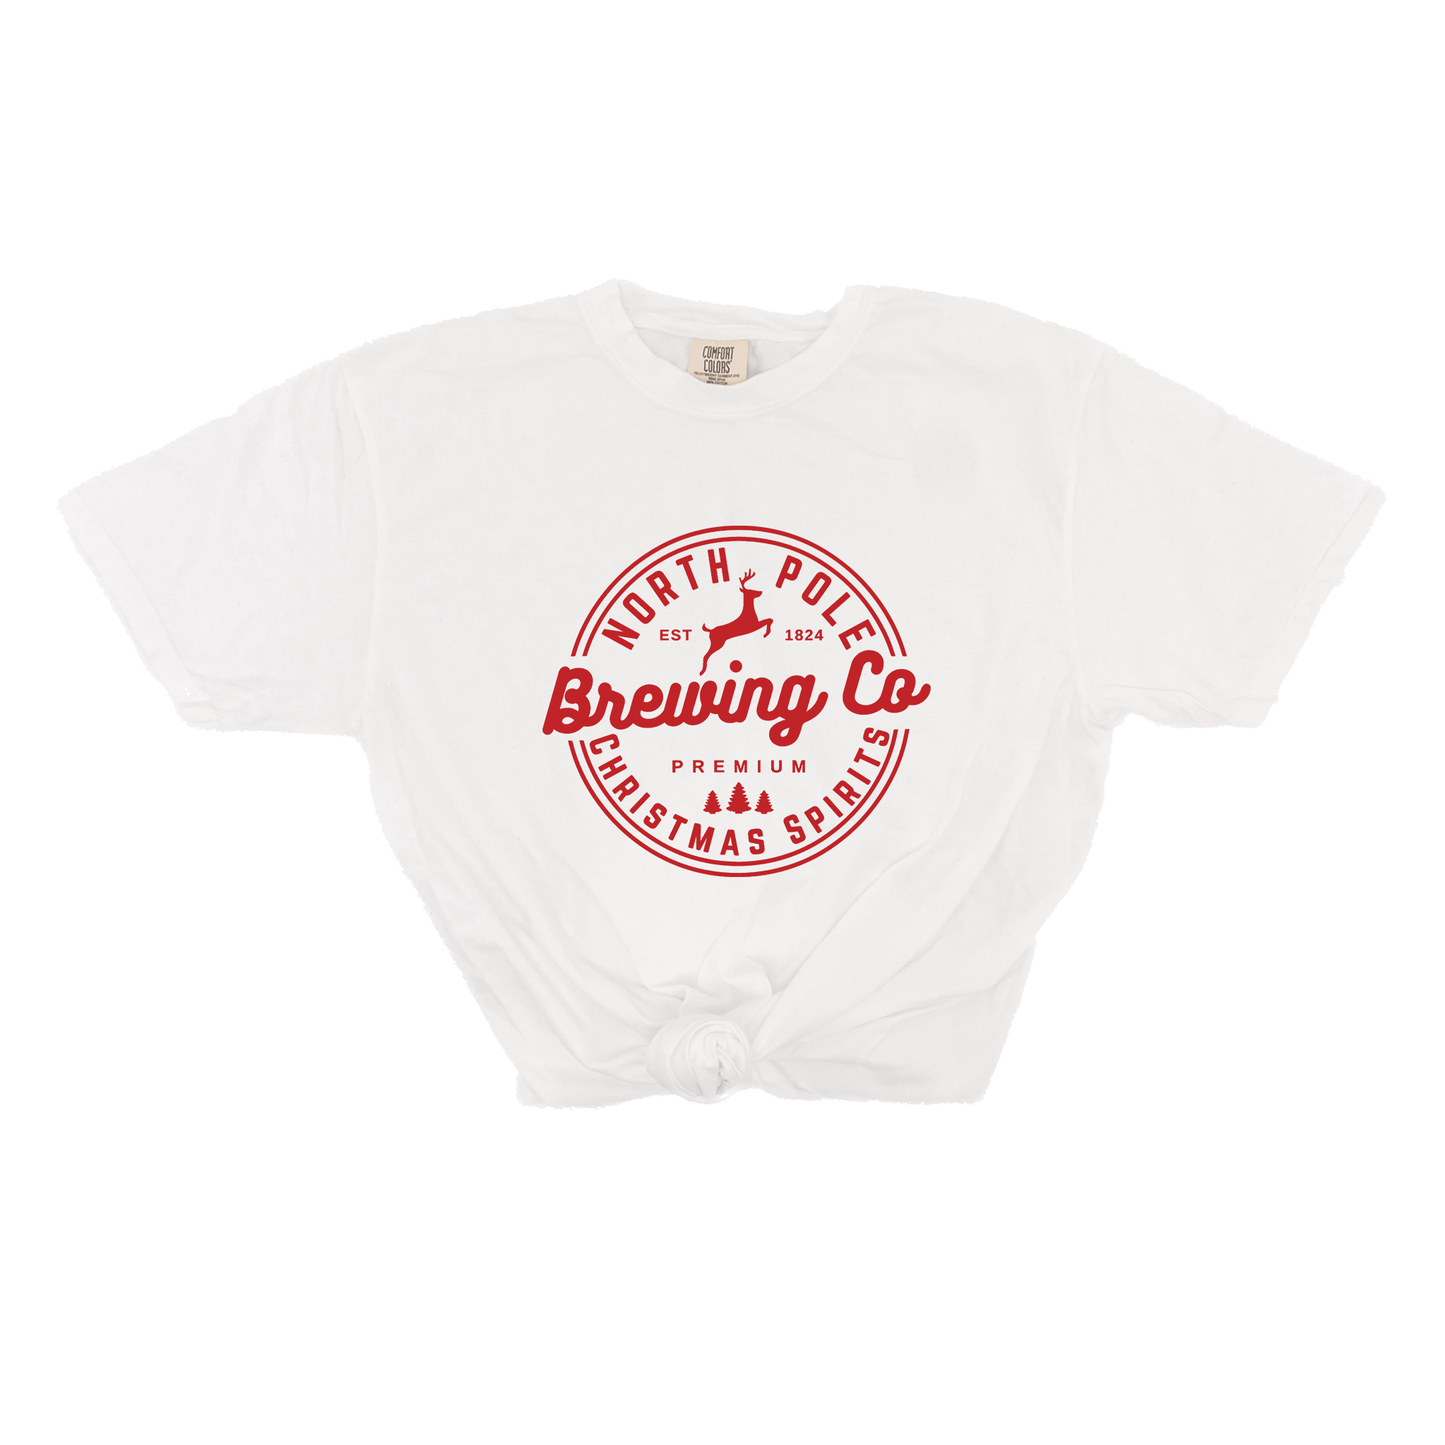 North Pole Brewing Co. (Red) - Tee (Vintage White, Short Sleeve)